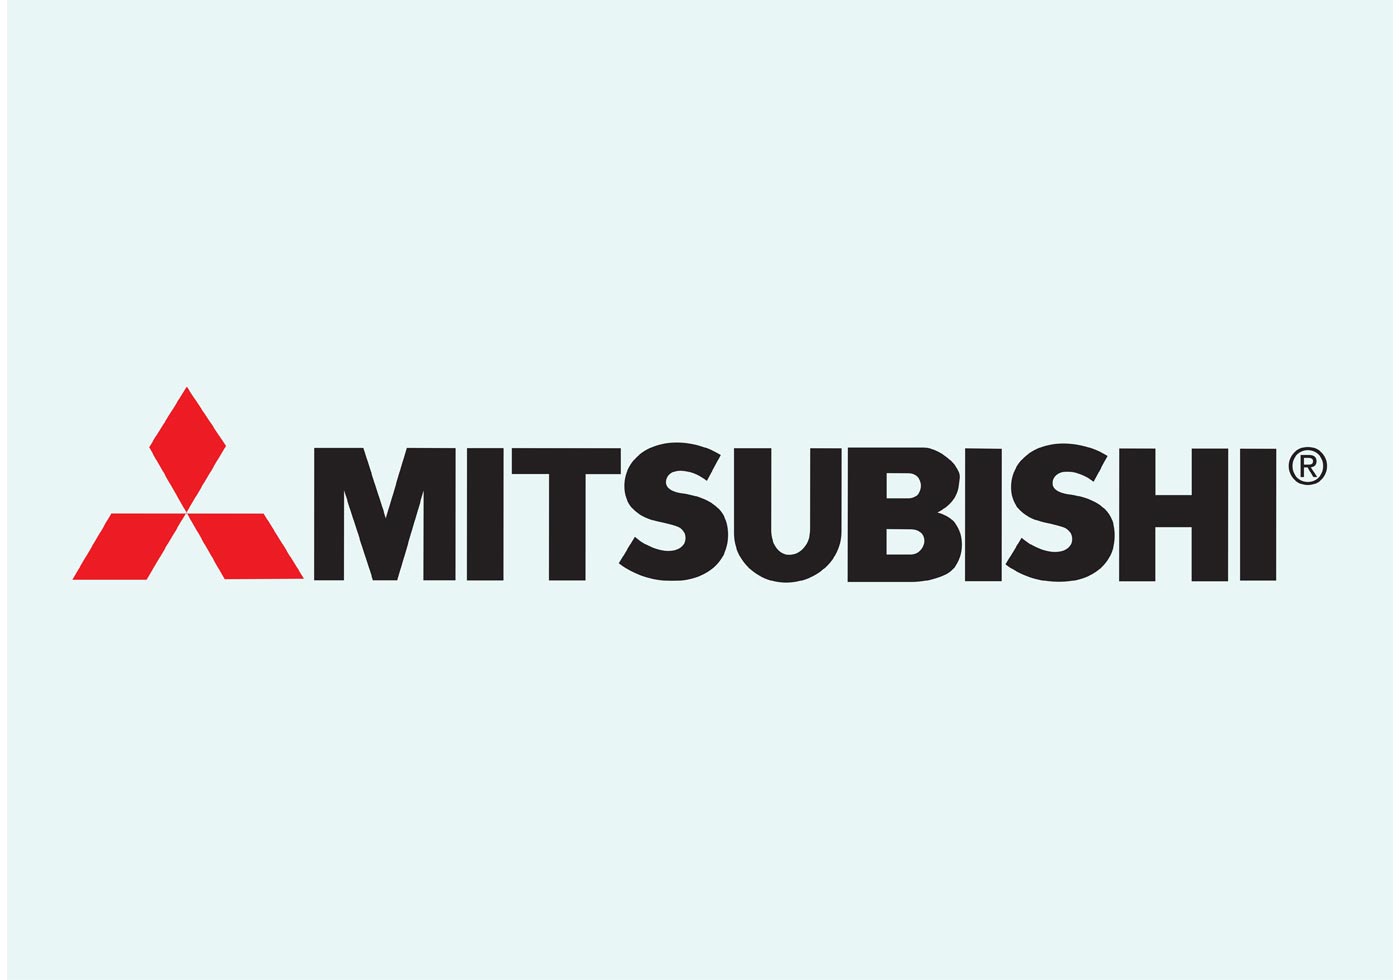 Mitsubishi returns to making money at its Valencian plant, its oldest subsidiary outside Japan